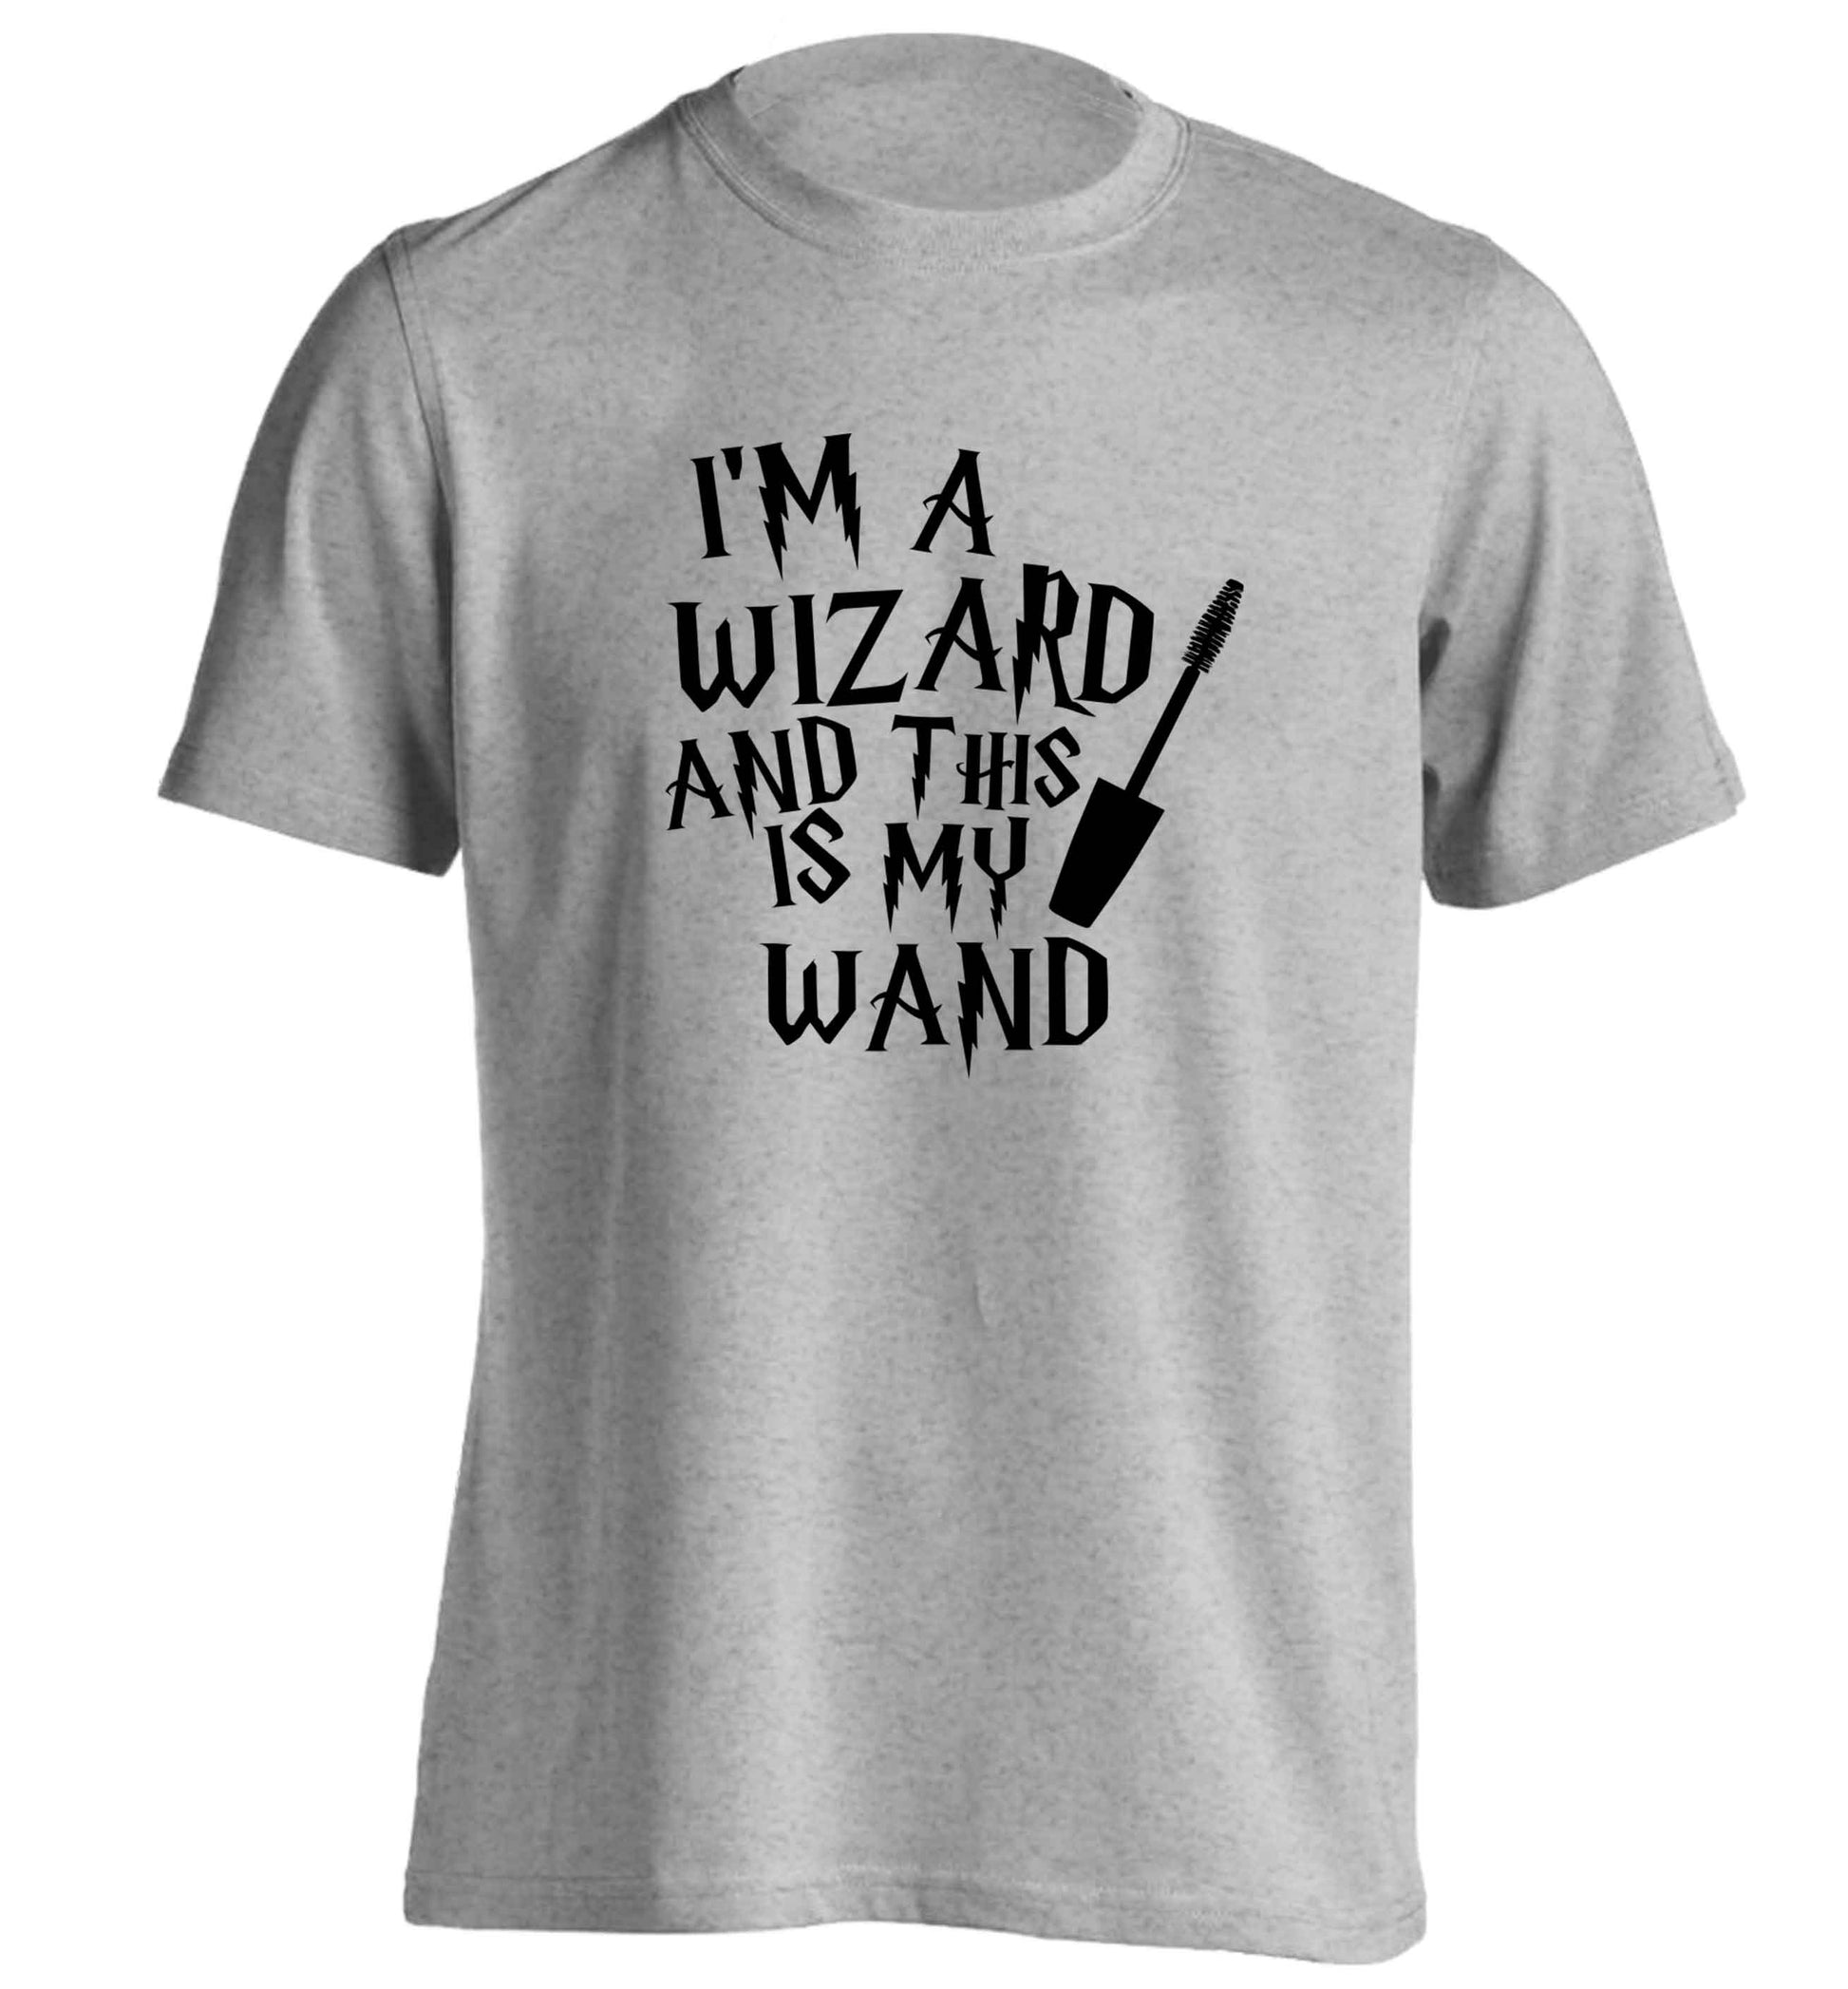 I'm a wizard and this is my wand adults unisex grey Tshirt 2XL